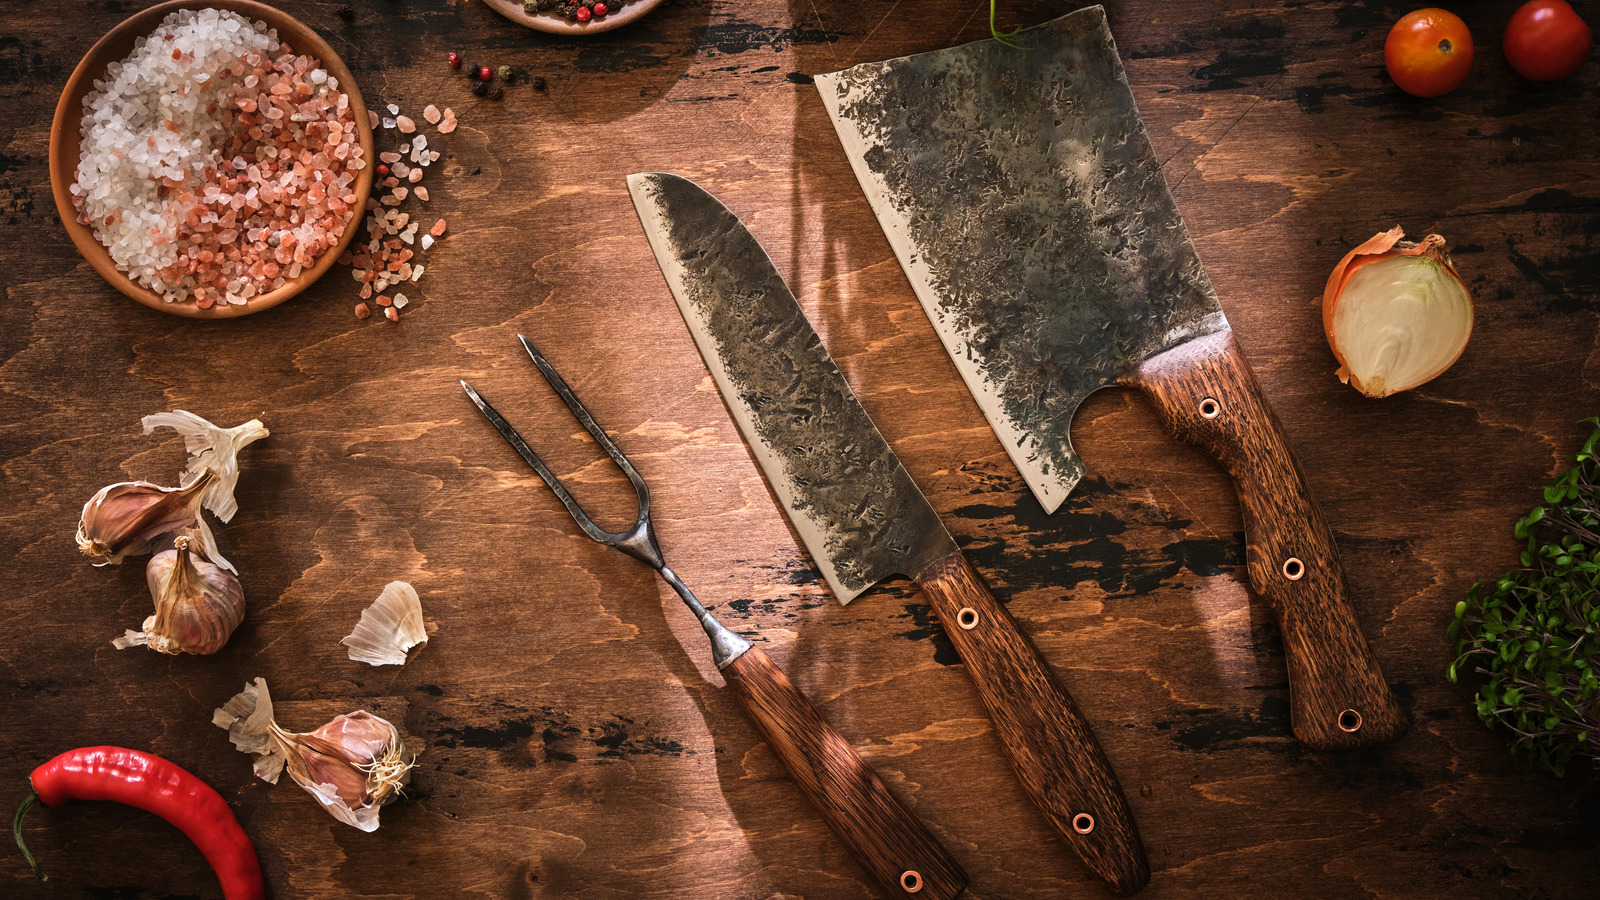 https://www.tastingtable.com/img/gallery/chef-vs-butcher-knife-whats-the-difference/l-intro-1666809465.jpg